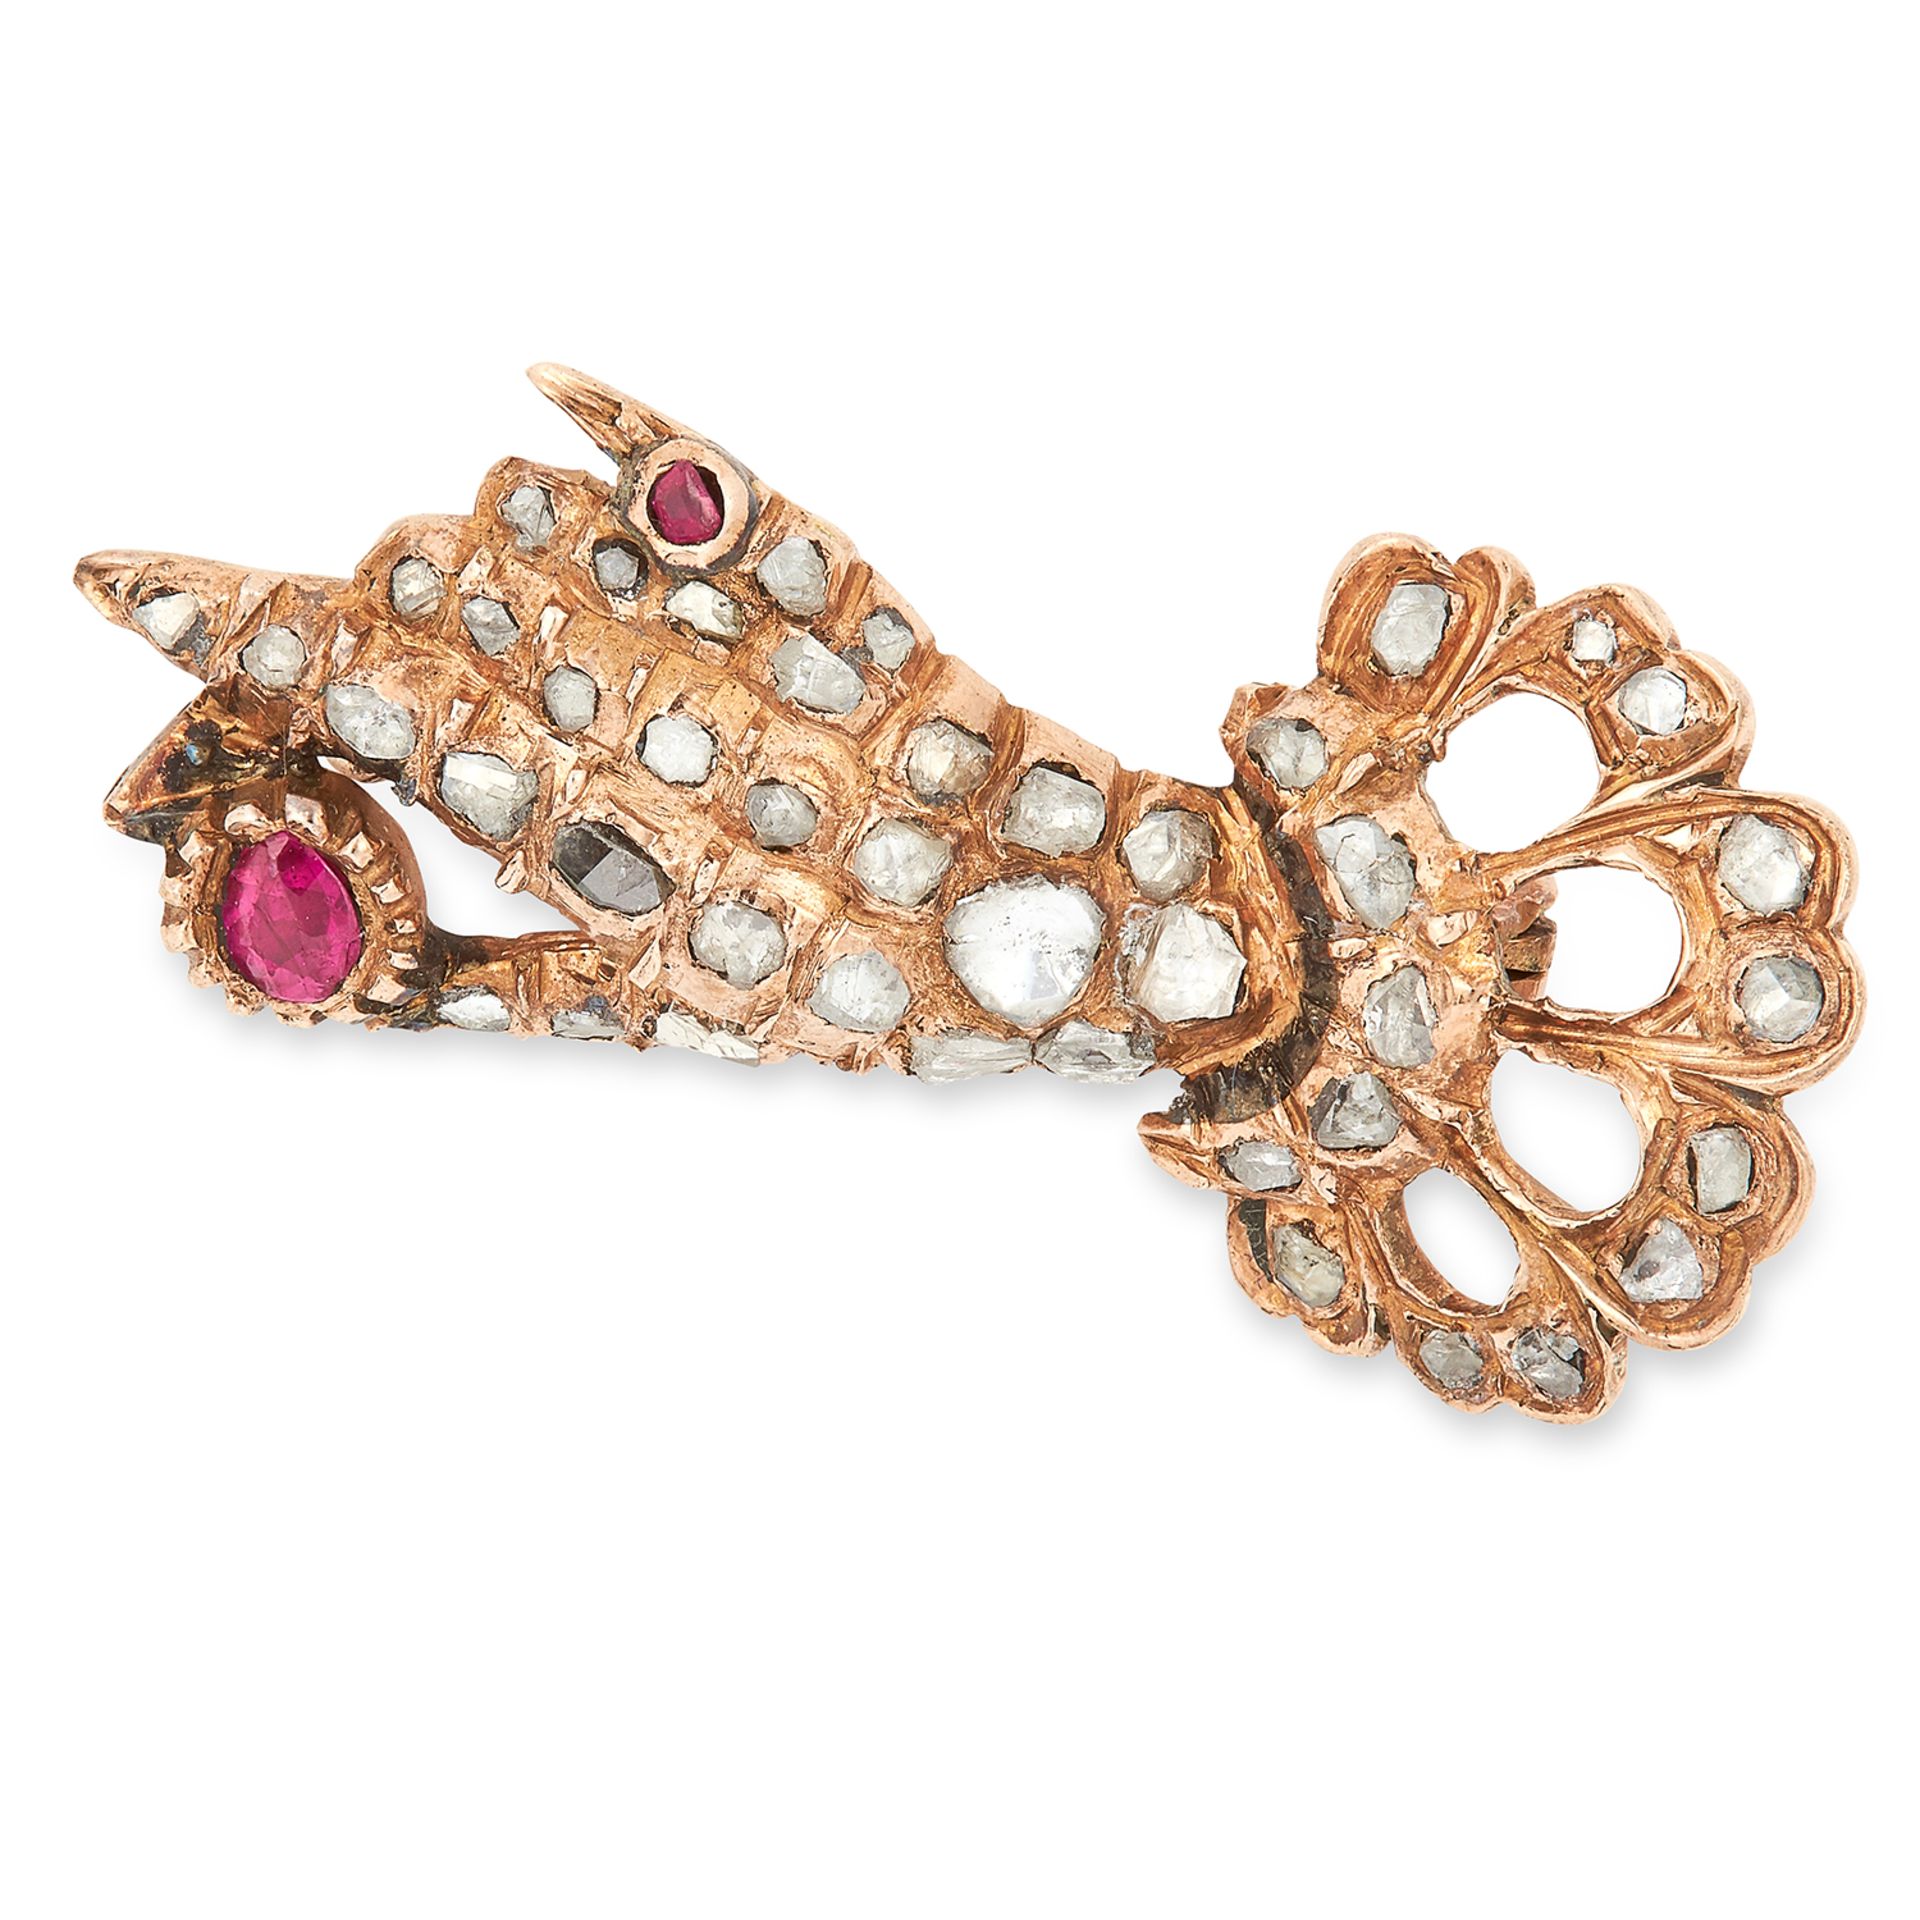 ANTIQUE RUBY AND DIAMOND HAND BROOCH set with cushion cut rubies and rose cut diamonds, 3.3cm, 4.